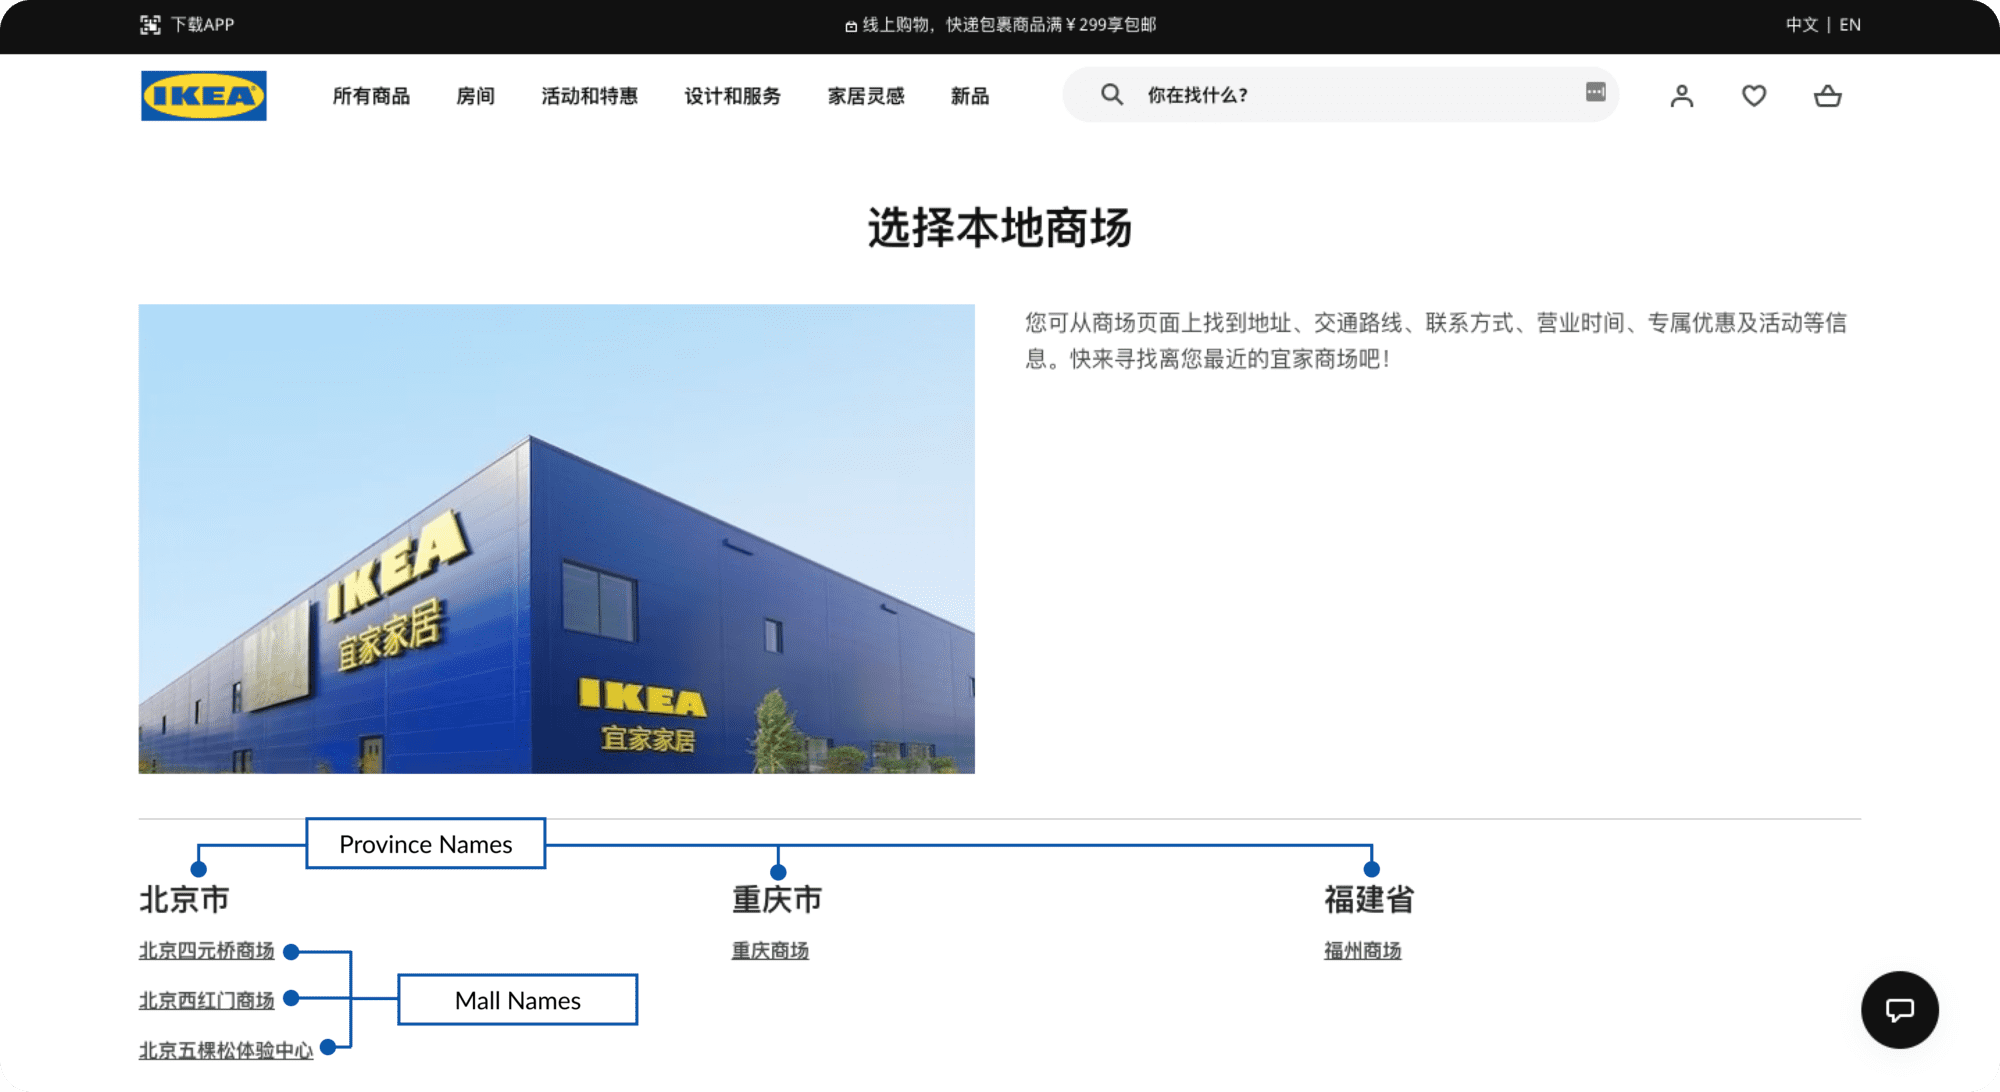 IKEA China Location page listing the local malls that customers can find IKEA in